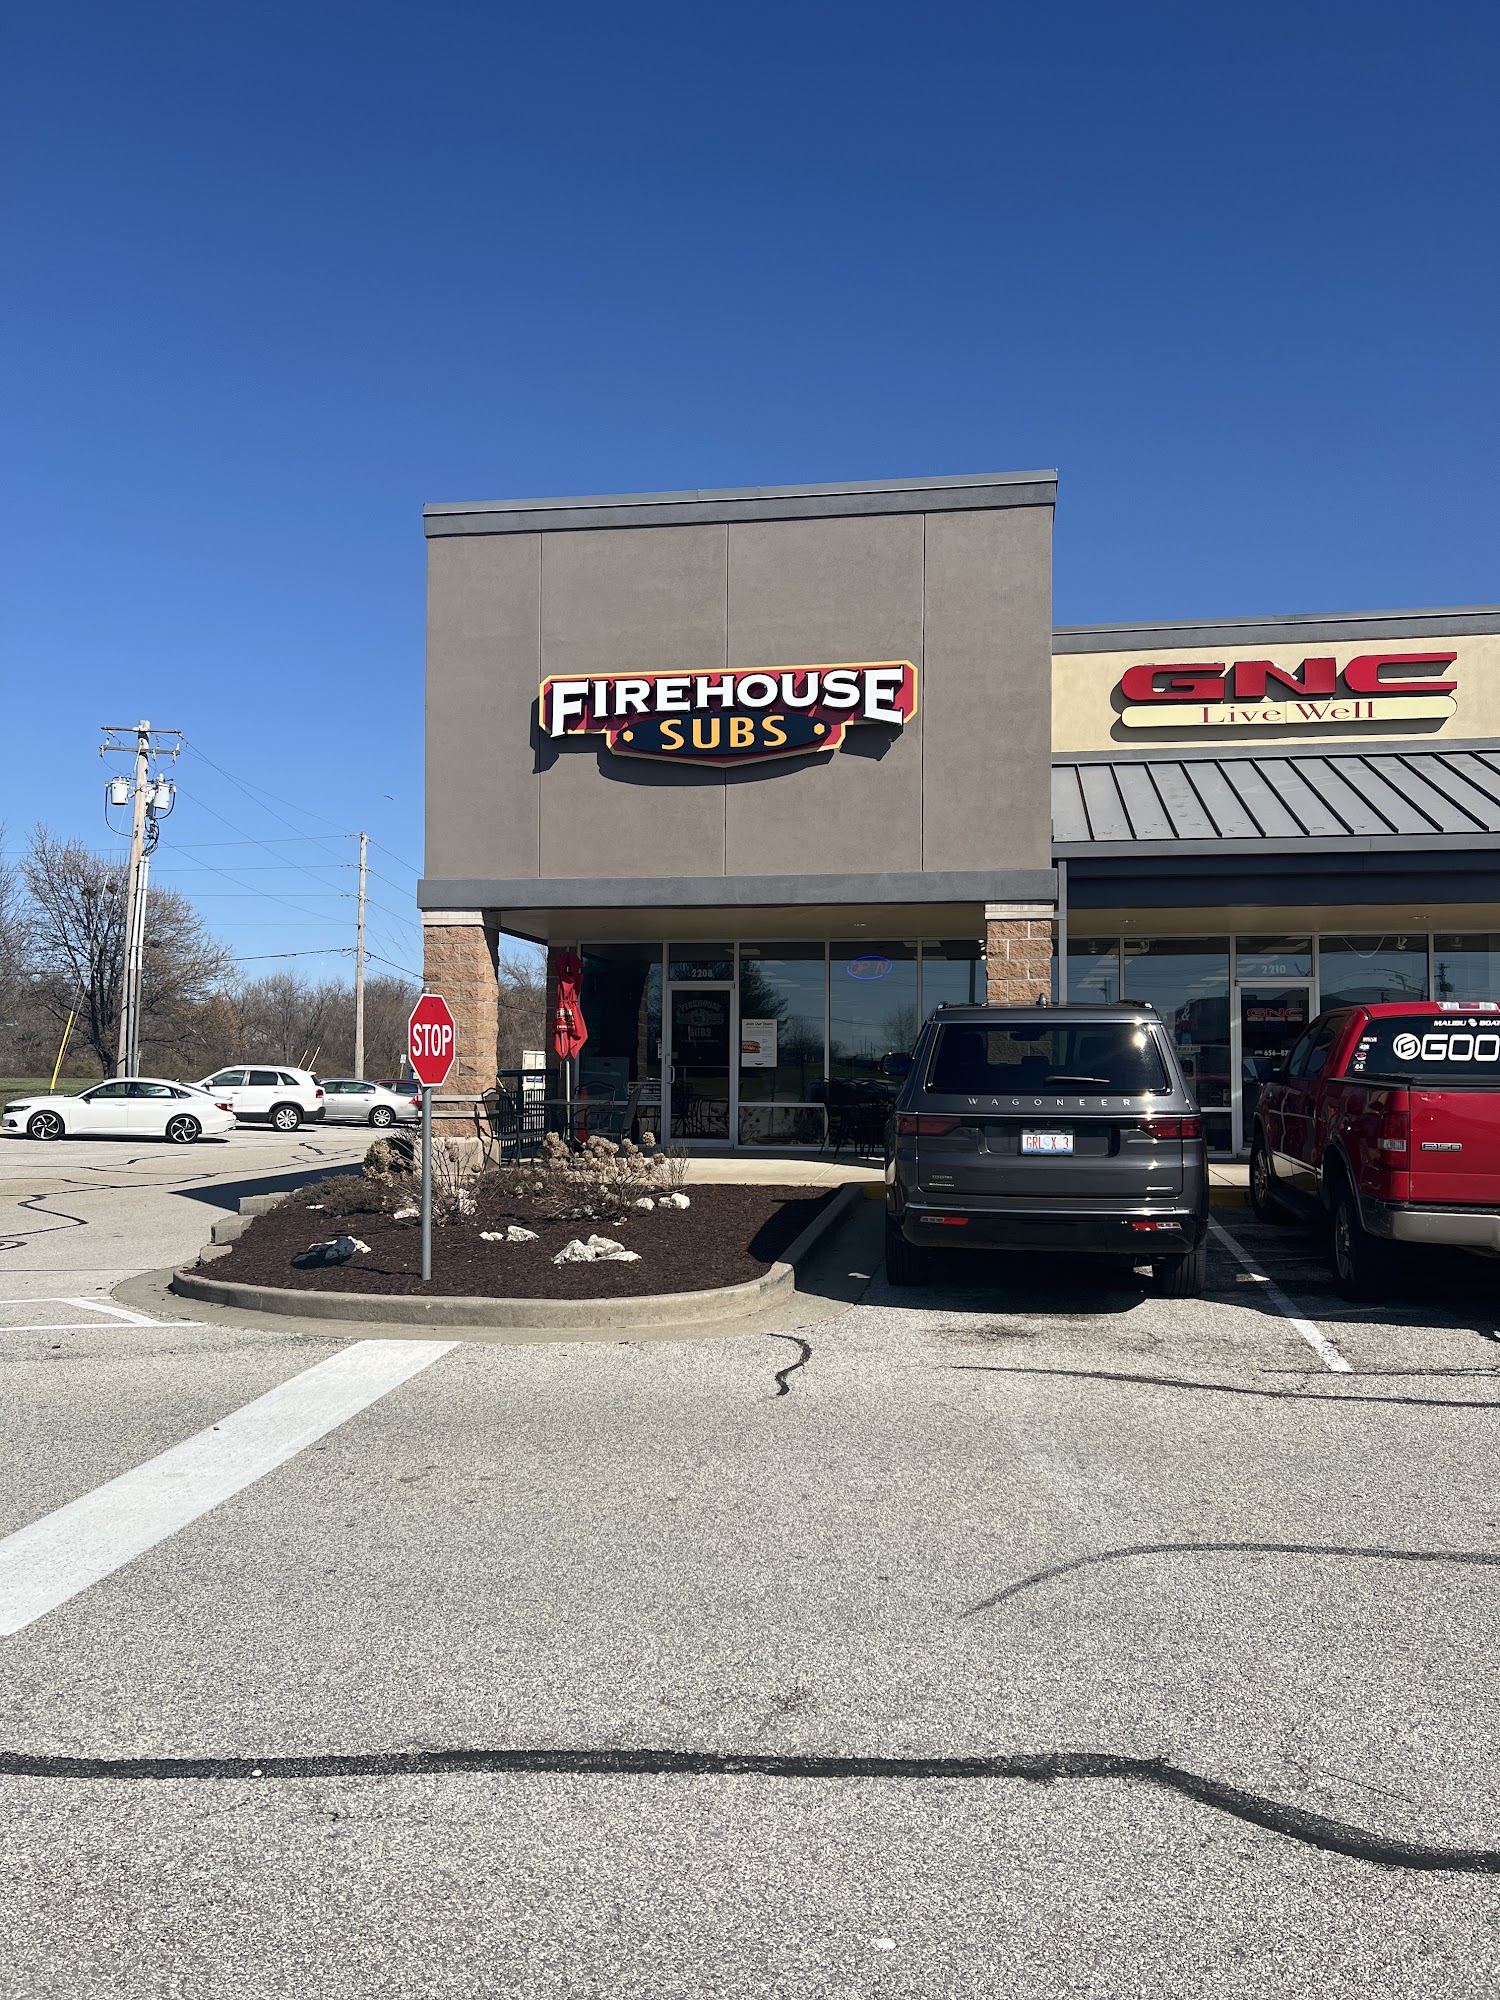 Firehouse Subs Edwardsville Troy Rd.